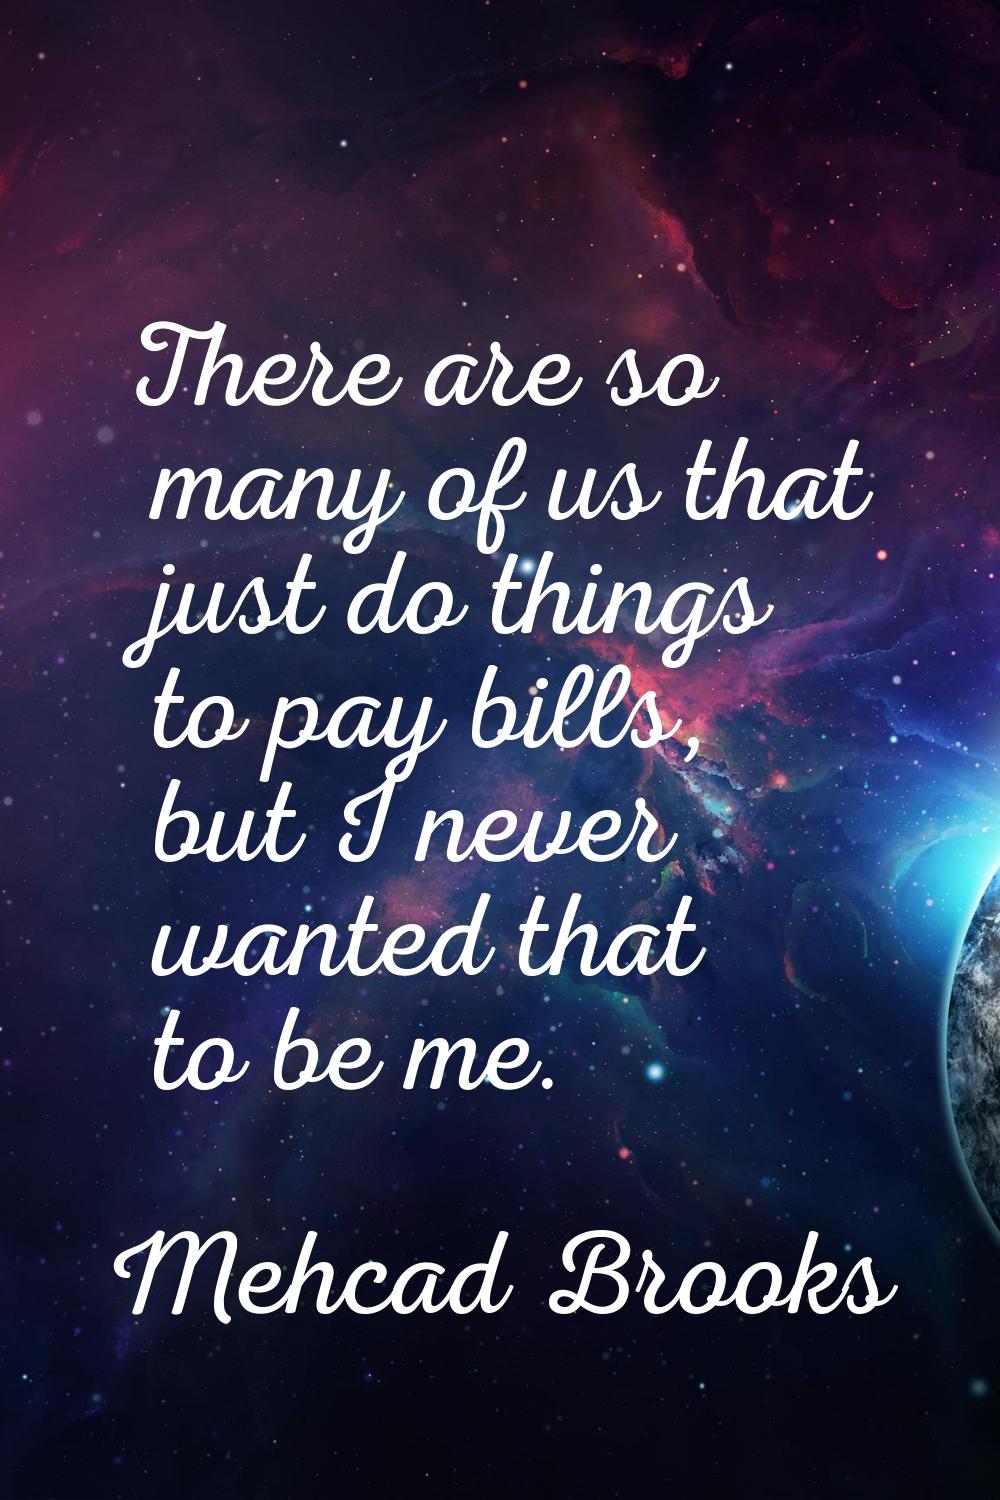 There are so many of us that just do things to pay bills, but I never wanted that to be me.